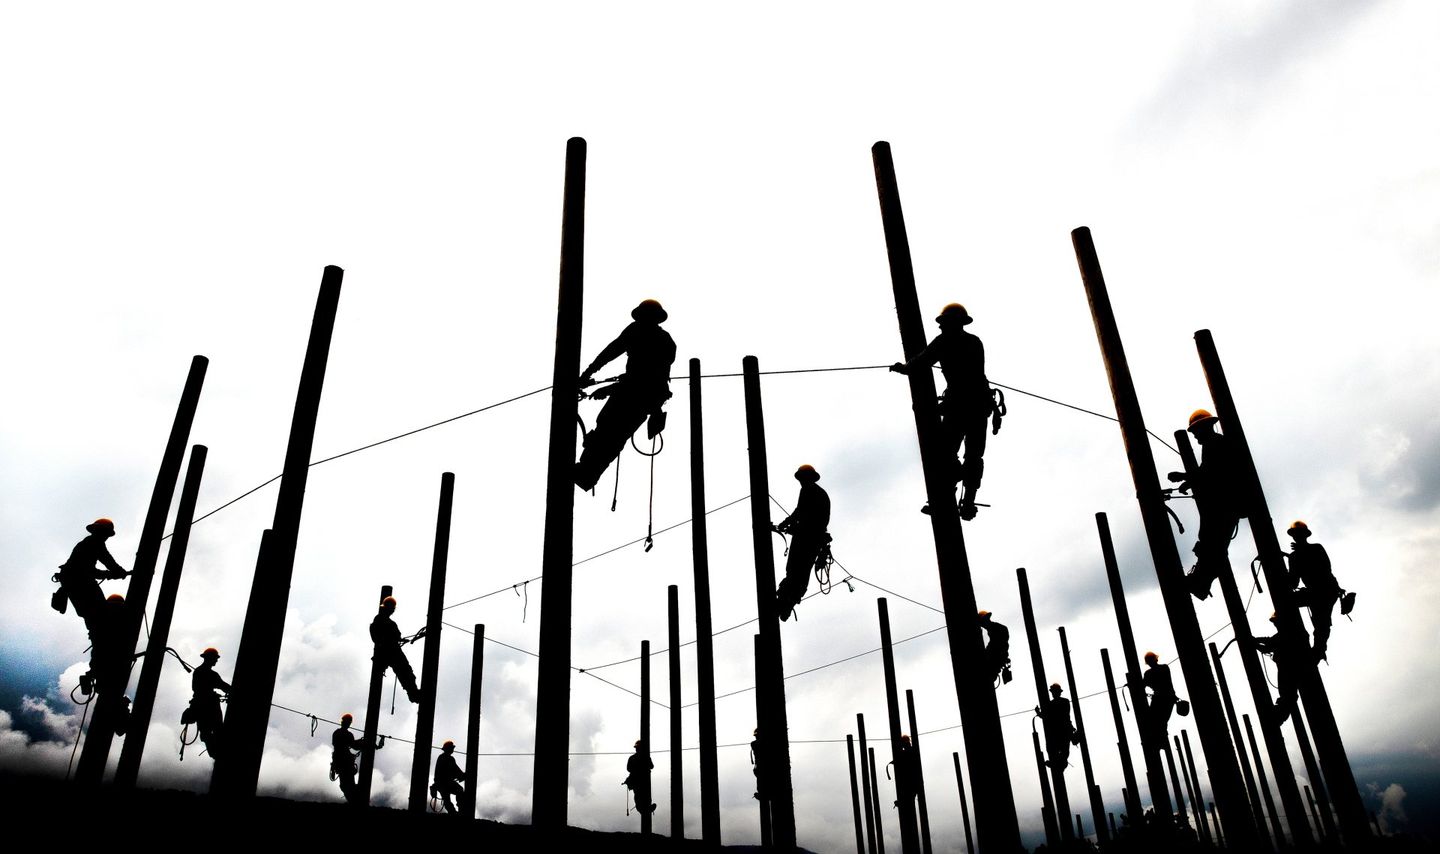 Students in an electrical lineman course practice their skills while atop poles. The workers are silhouetted and the photo includes more than a dozen of the students at work. 